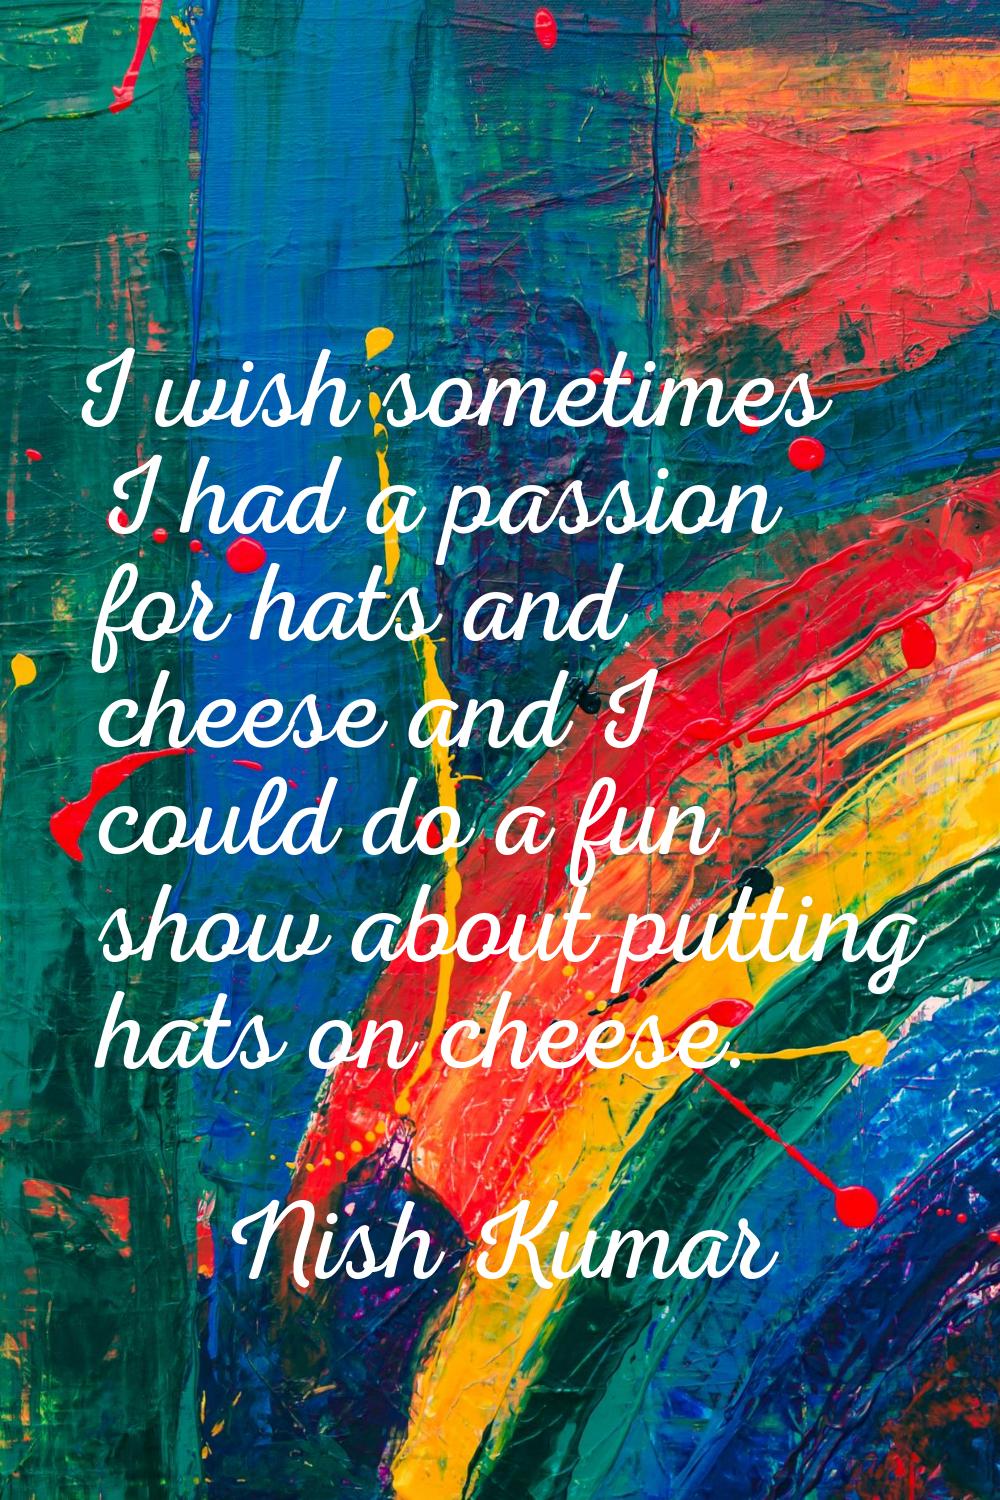 I wish sometimes I had a passion for hats and cheese and I could do a fun show about putting hats o